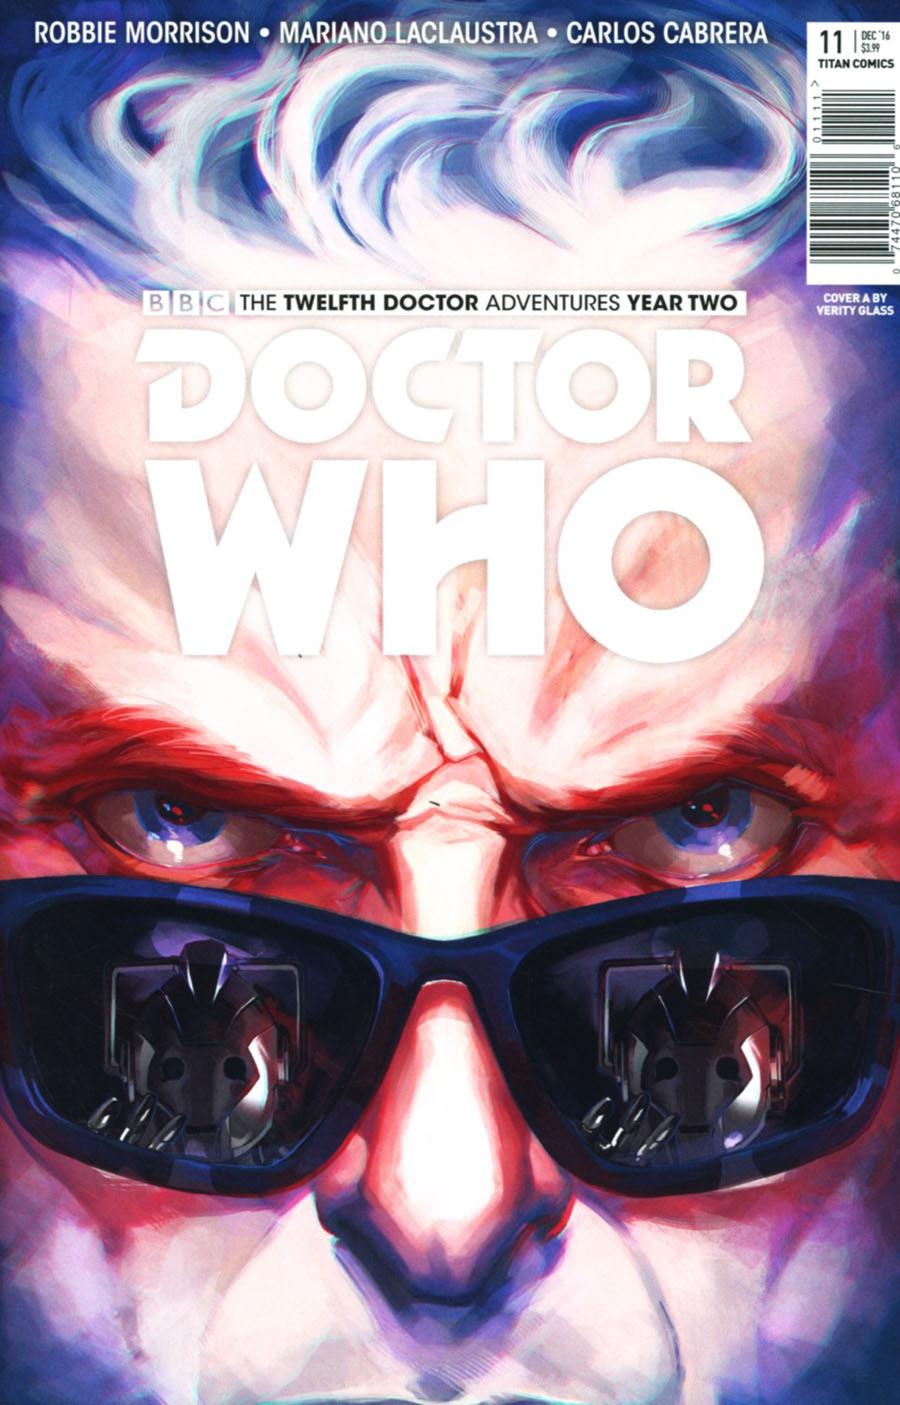 Doctor Who 12th Doctor Year Two Vol. 1 #11